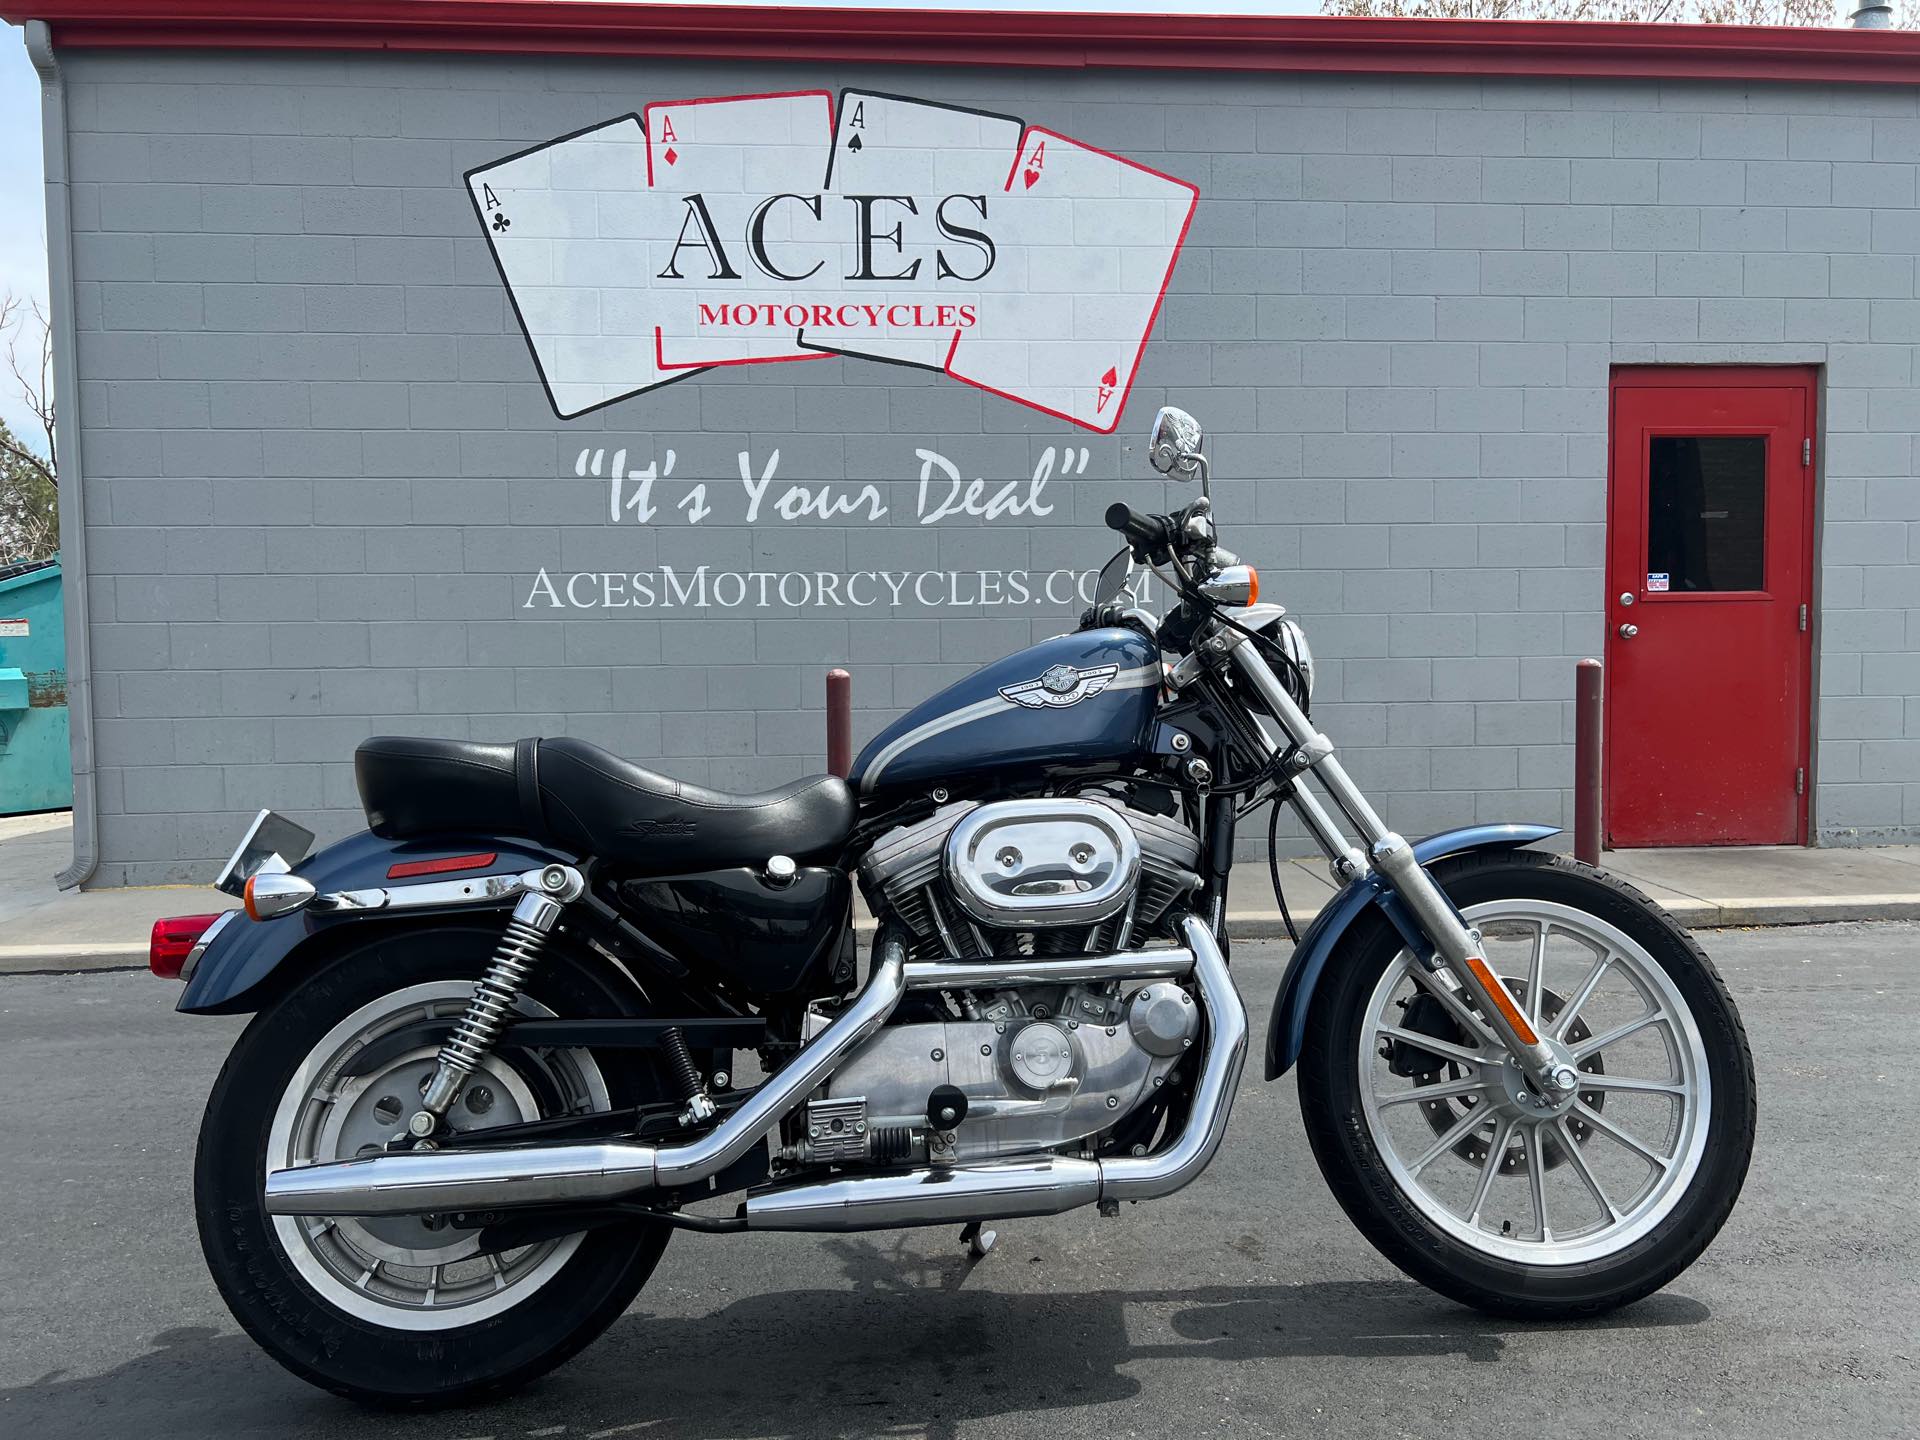 2003 Harley-Davidson XL883 at Aces Motorcycles - Fort Collins